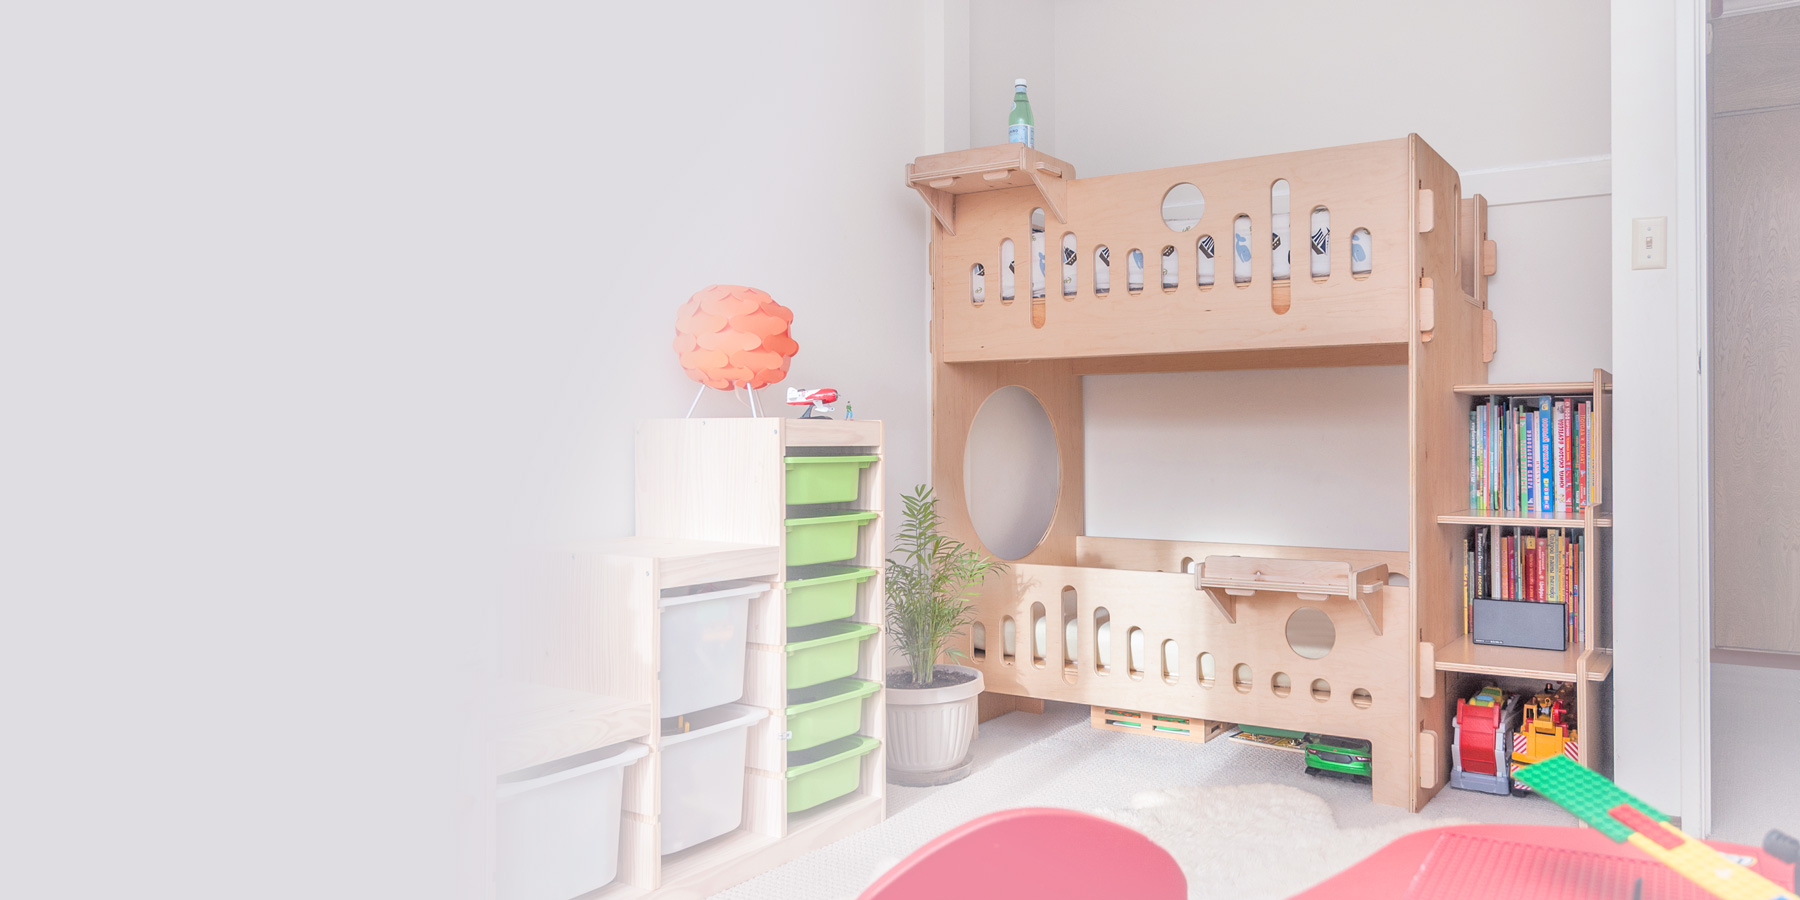 crib and bed bunk bed